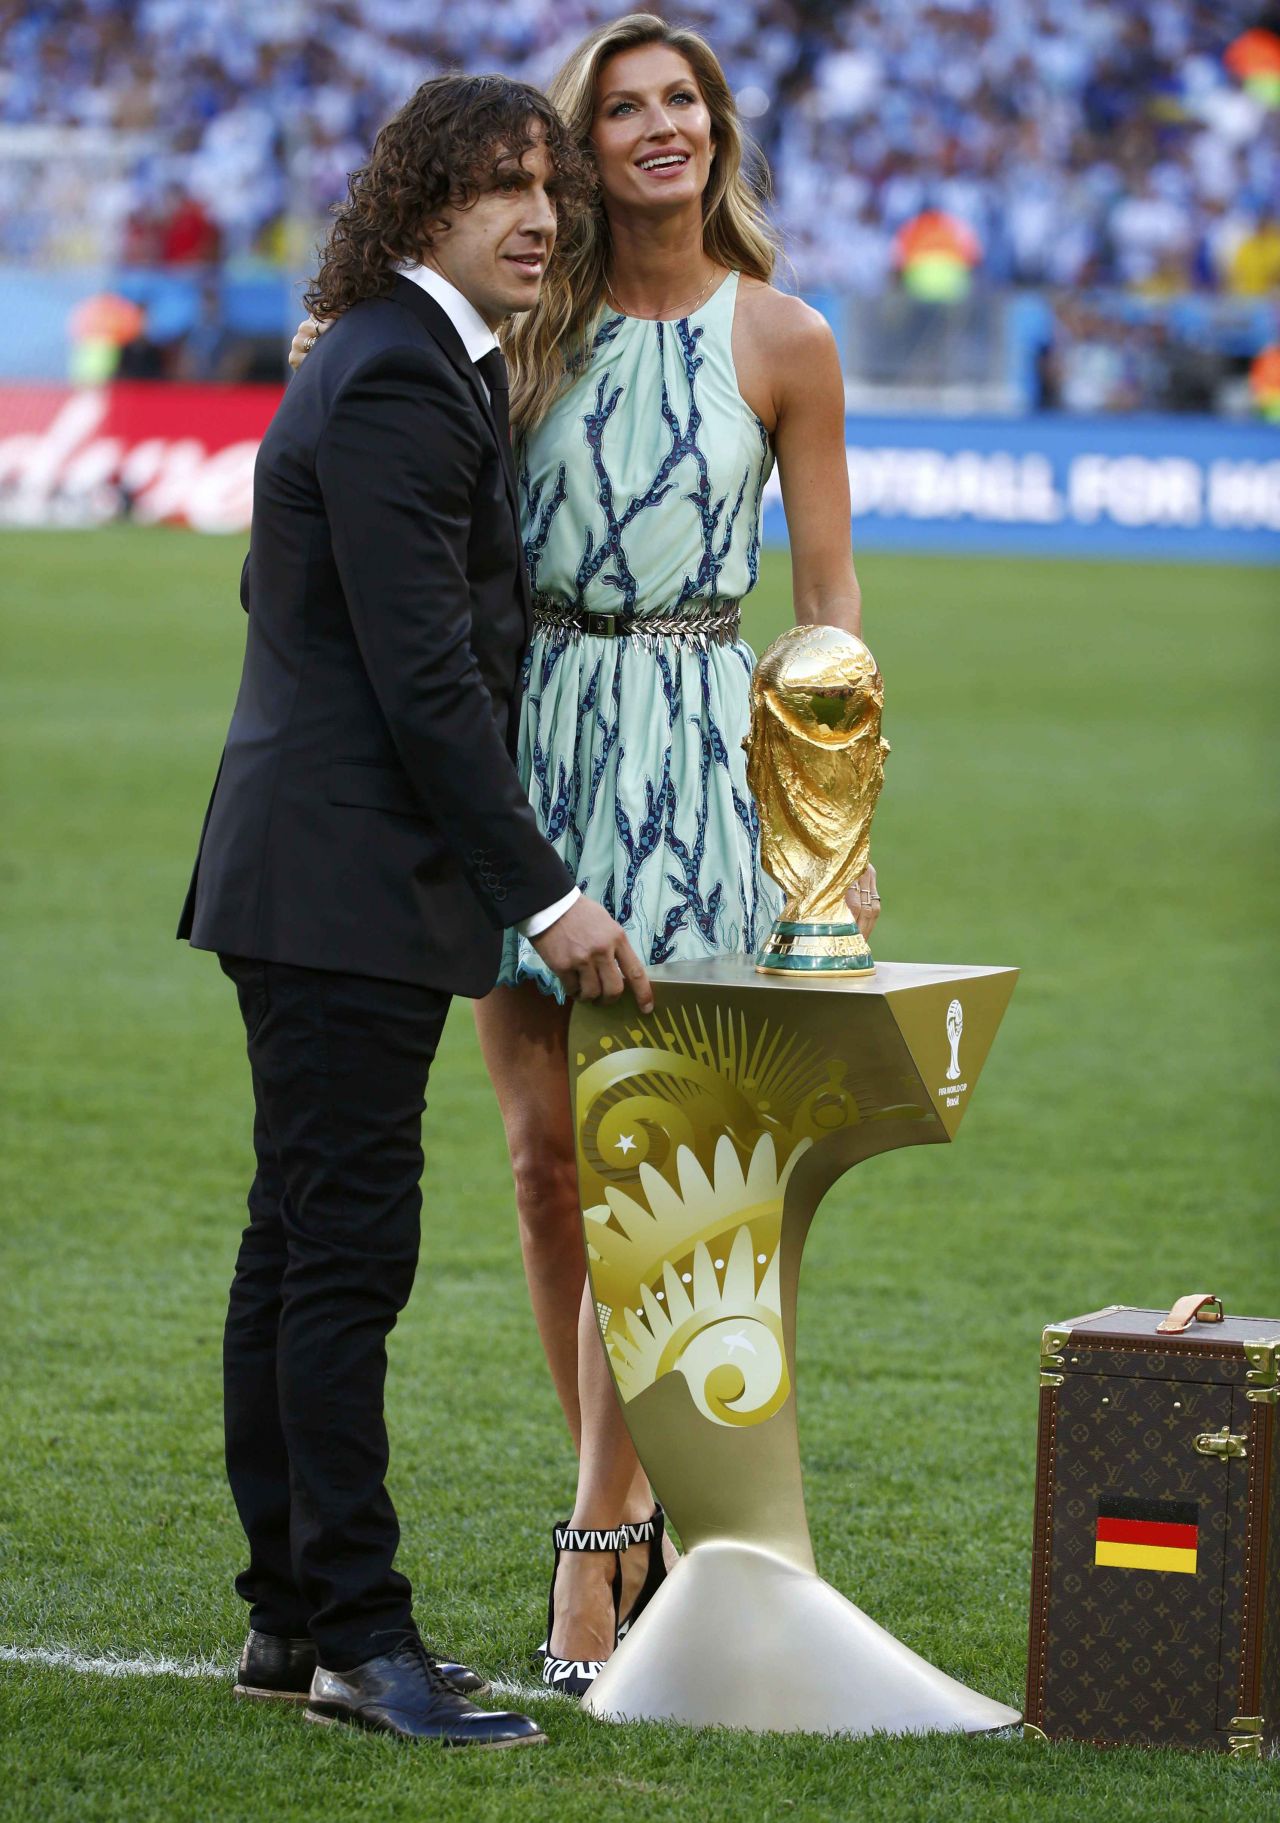 Sexy Gisele Bundchen unveils FIFA World Cup 2014 trophy with